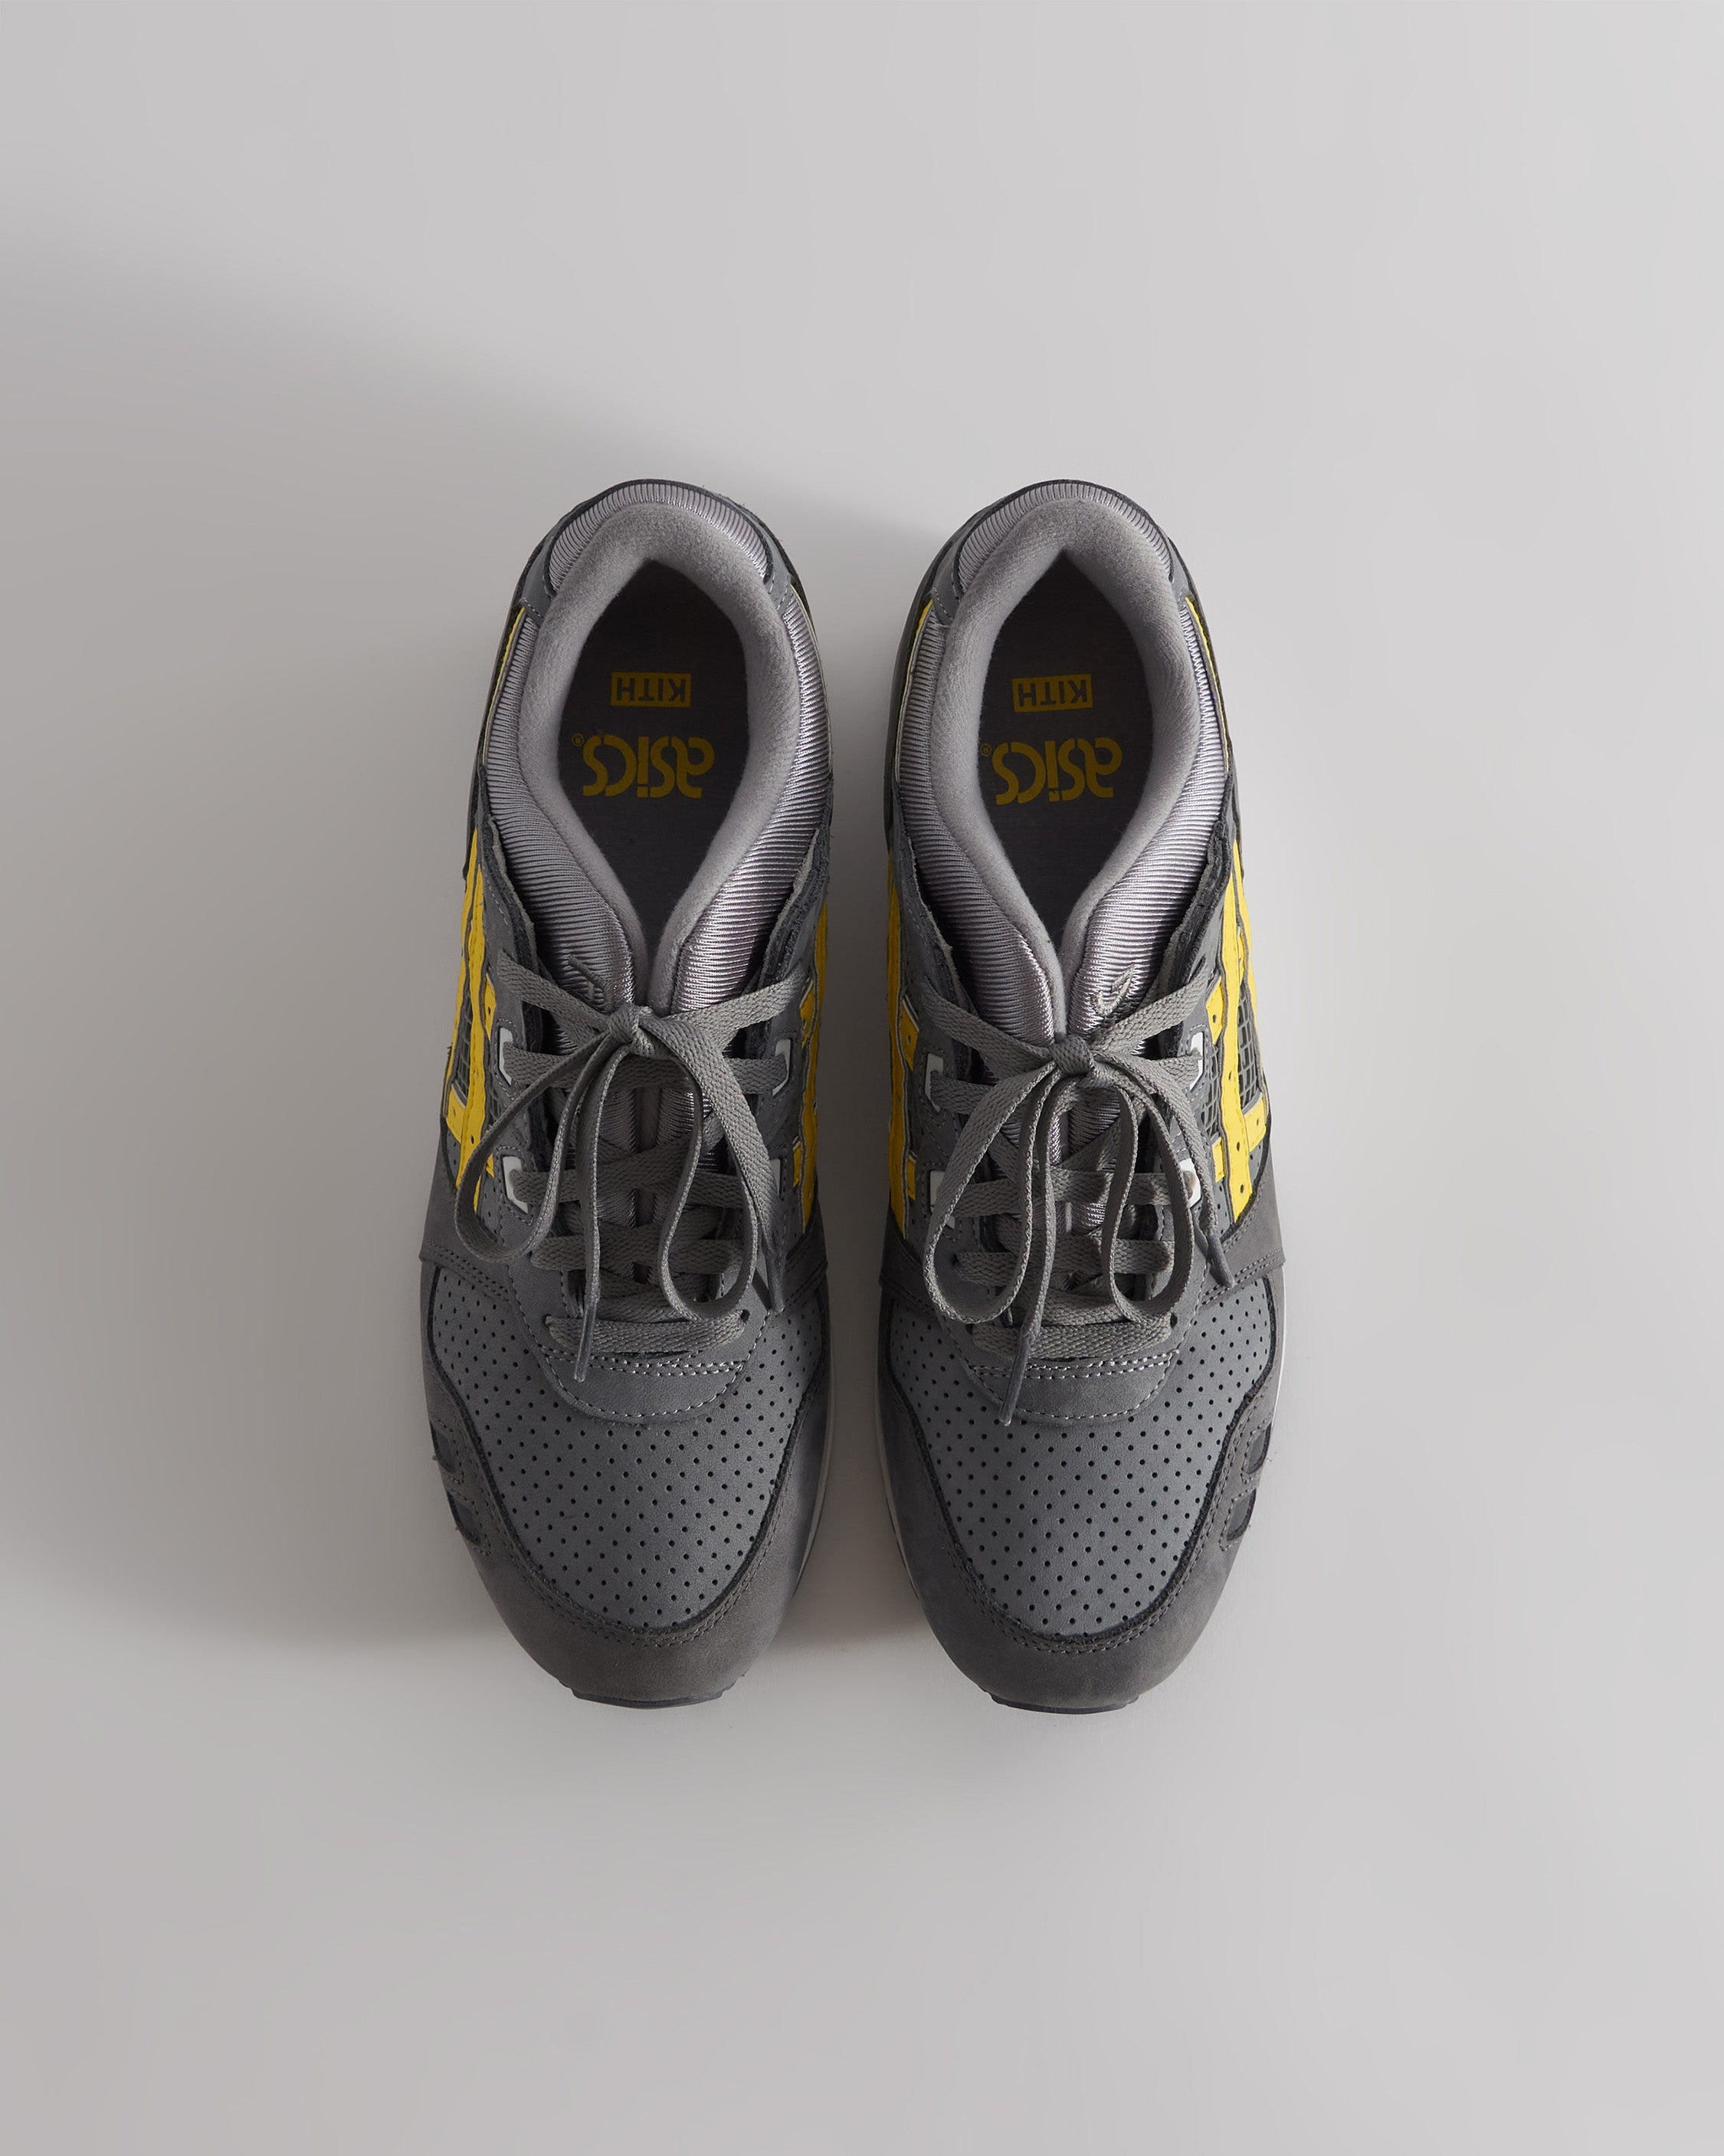 Ronnie Fieg for ASICS GEL-LYTE III Remastered - Super Yellow – Kith